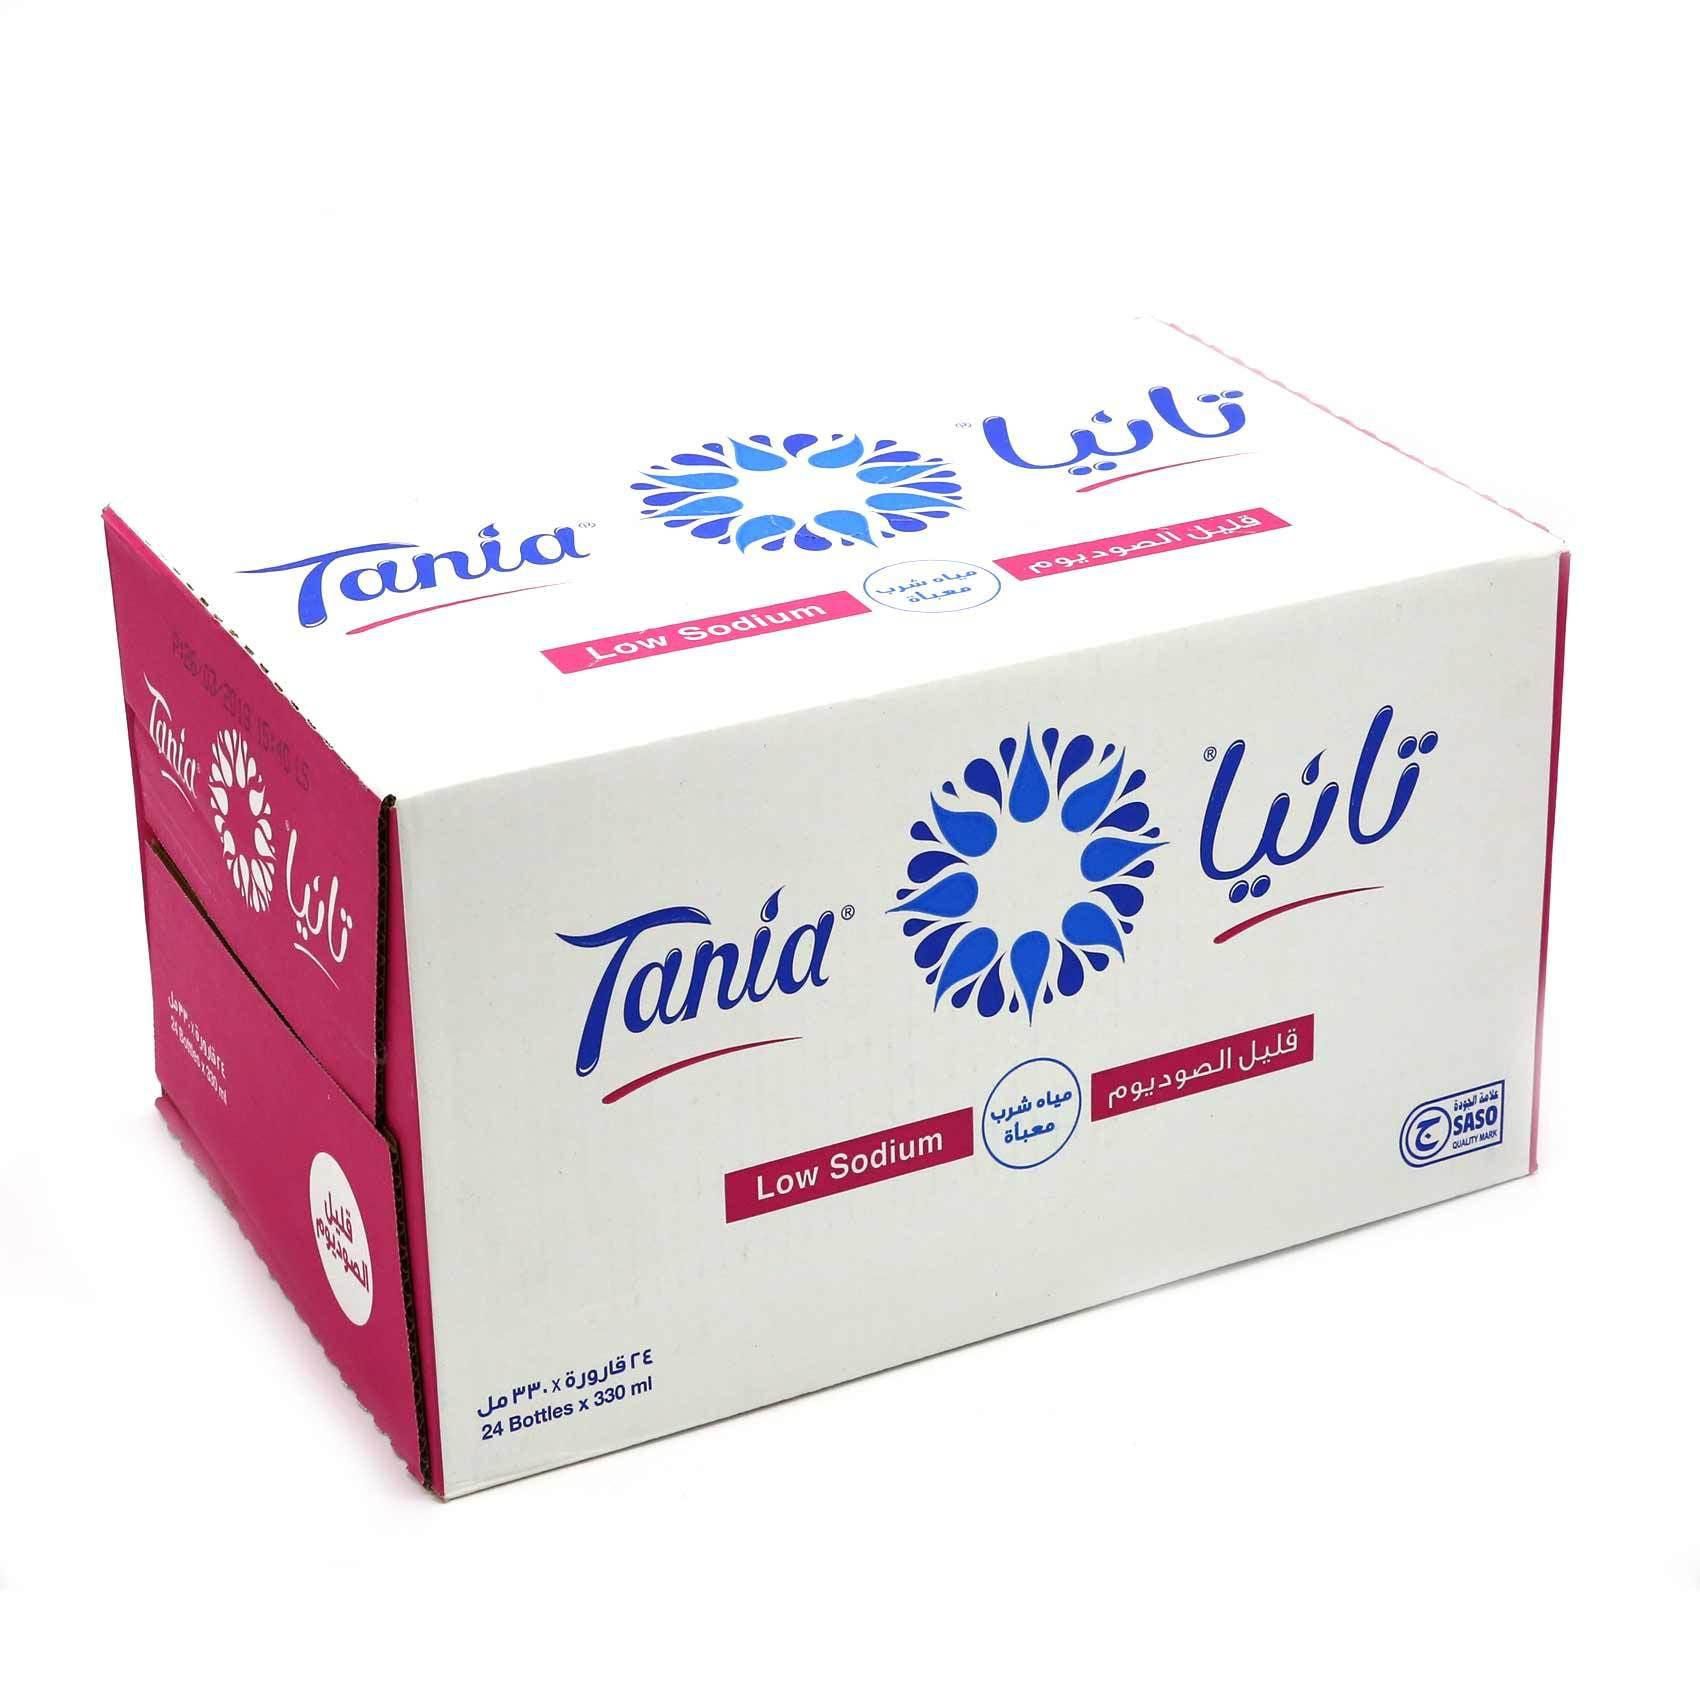 Tania water 330 ml x 24 pieces